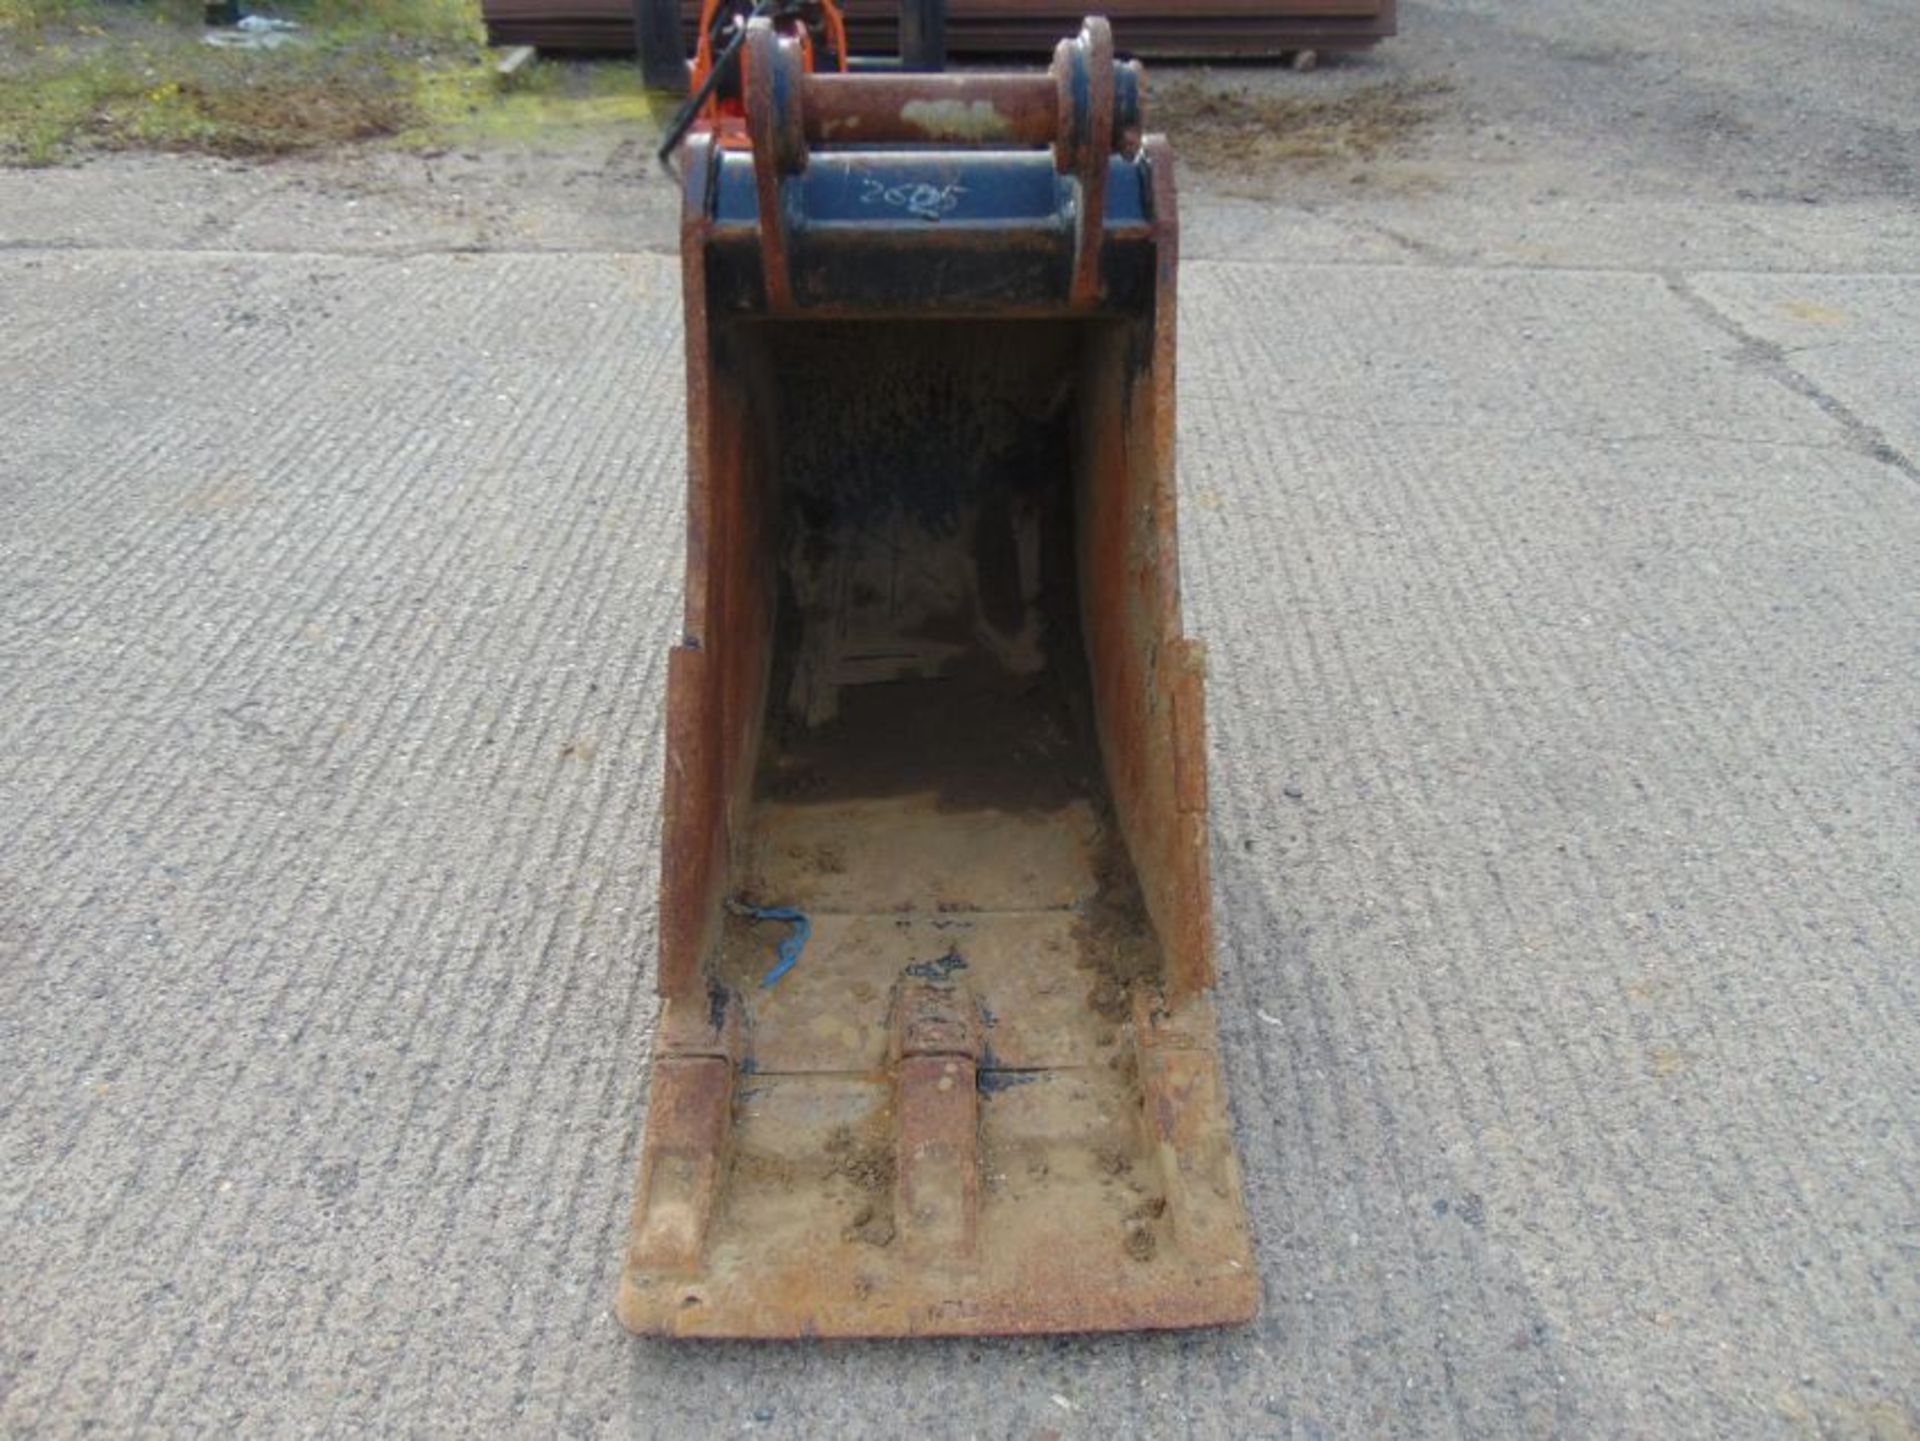 Strickland 23" Digging Bucket 65mm Pin to suit 13 Ton Excavator - Image 2 of 7